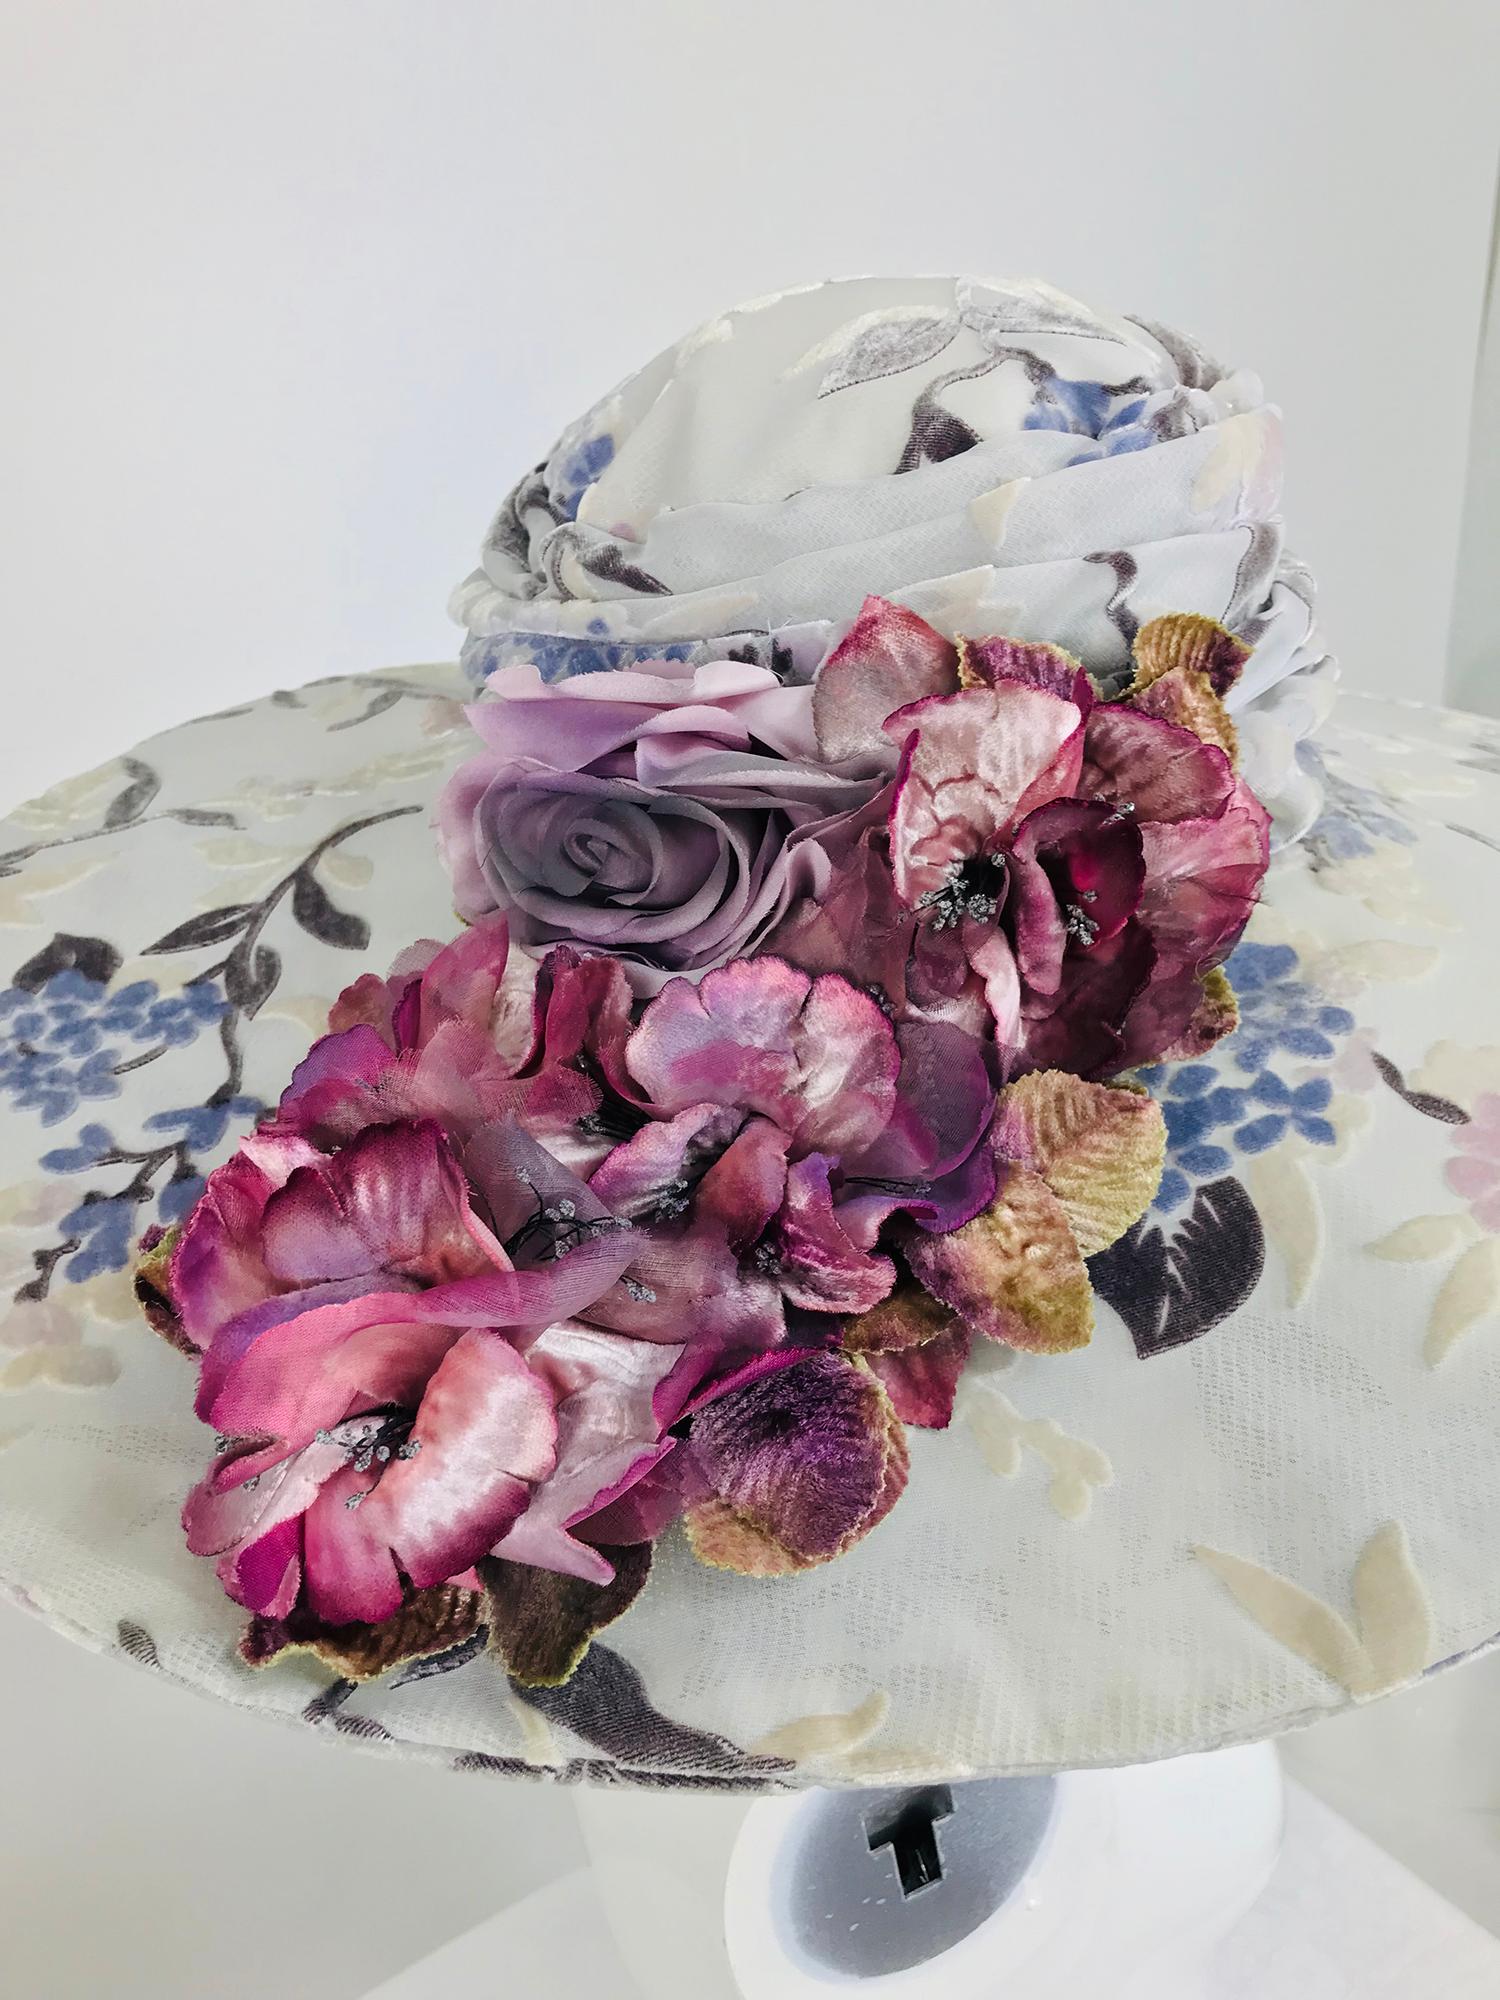 Kokin floral embellished devore velvet wide brim hat from the1990s. This beautiful hat is perfect for any occasion that requires you to look amazing. Oval brim hat is covered with pale grey devore velvet the design is floral with branches and